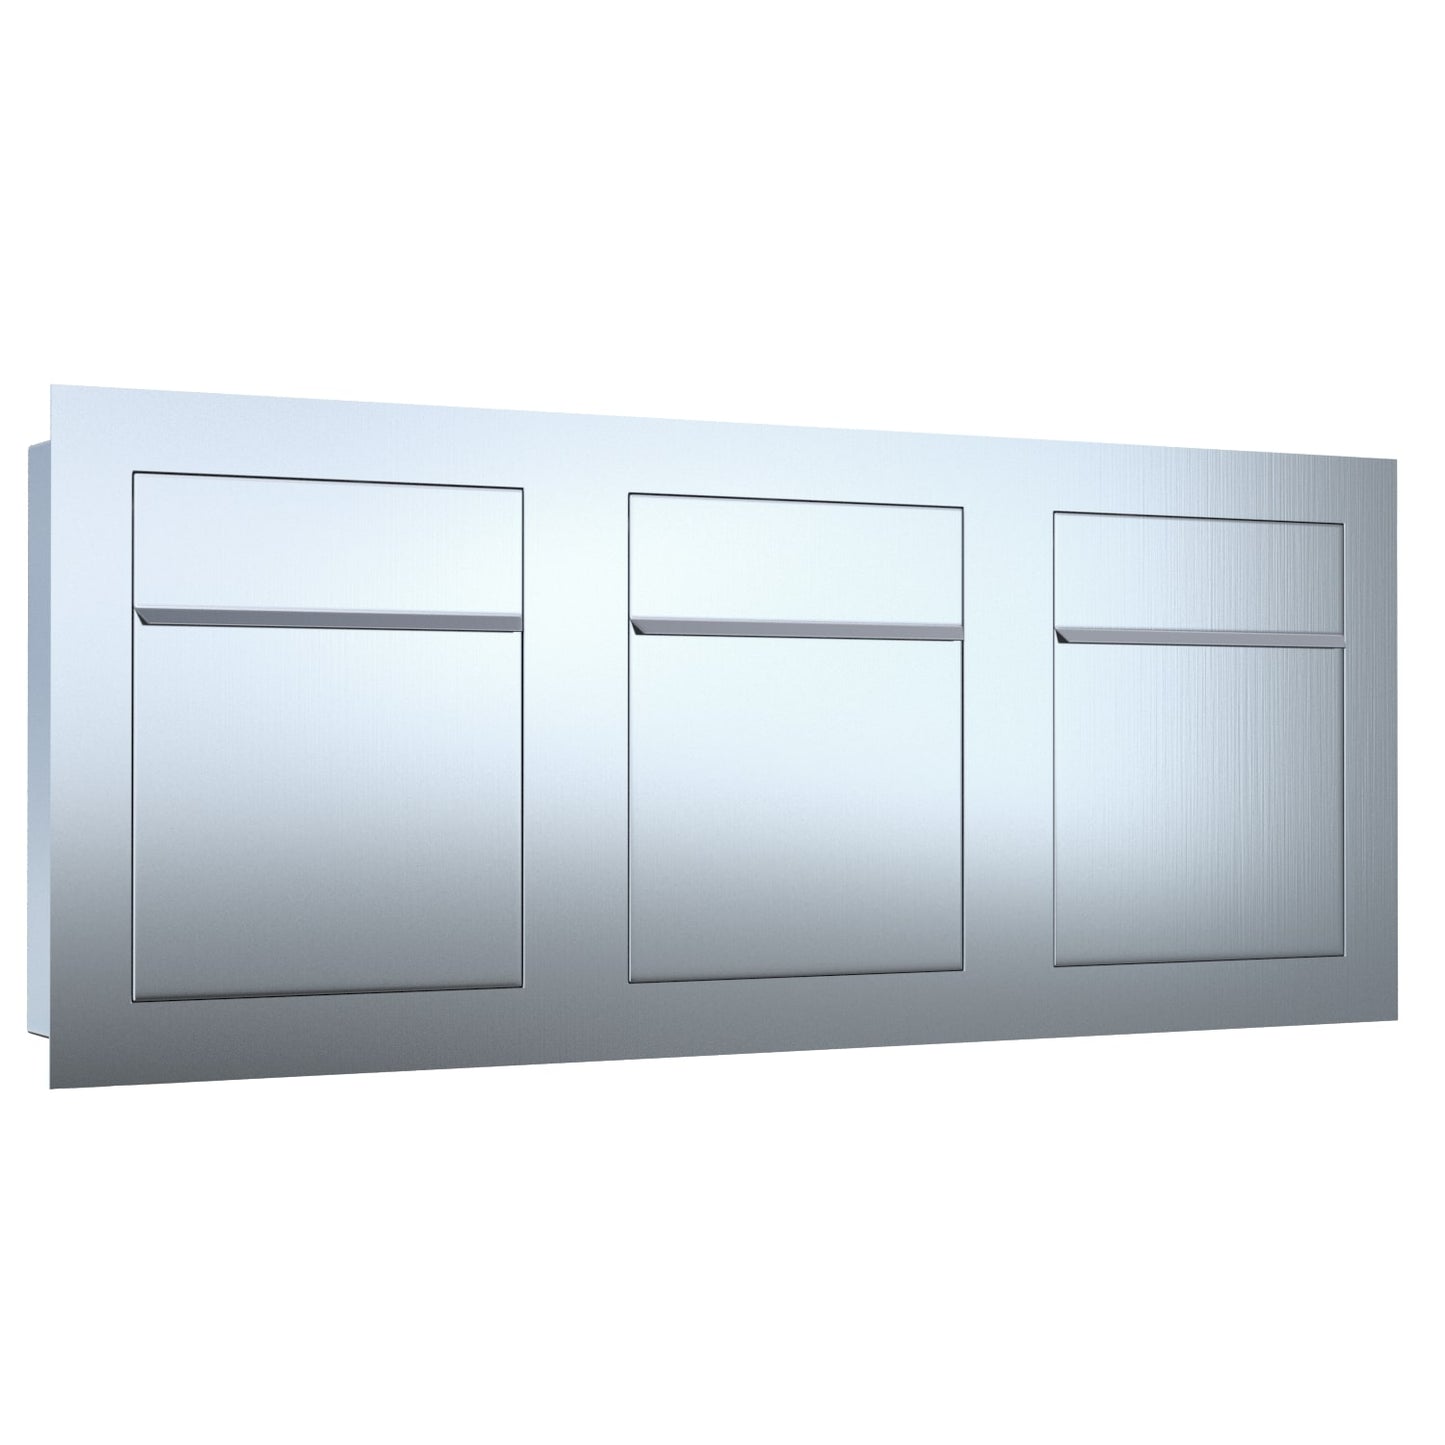 BARI 3 - Contemporary built-in mailbox in stainless steel